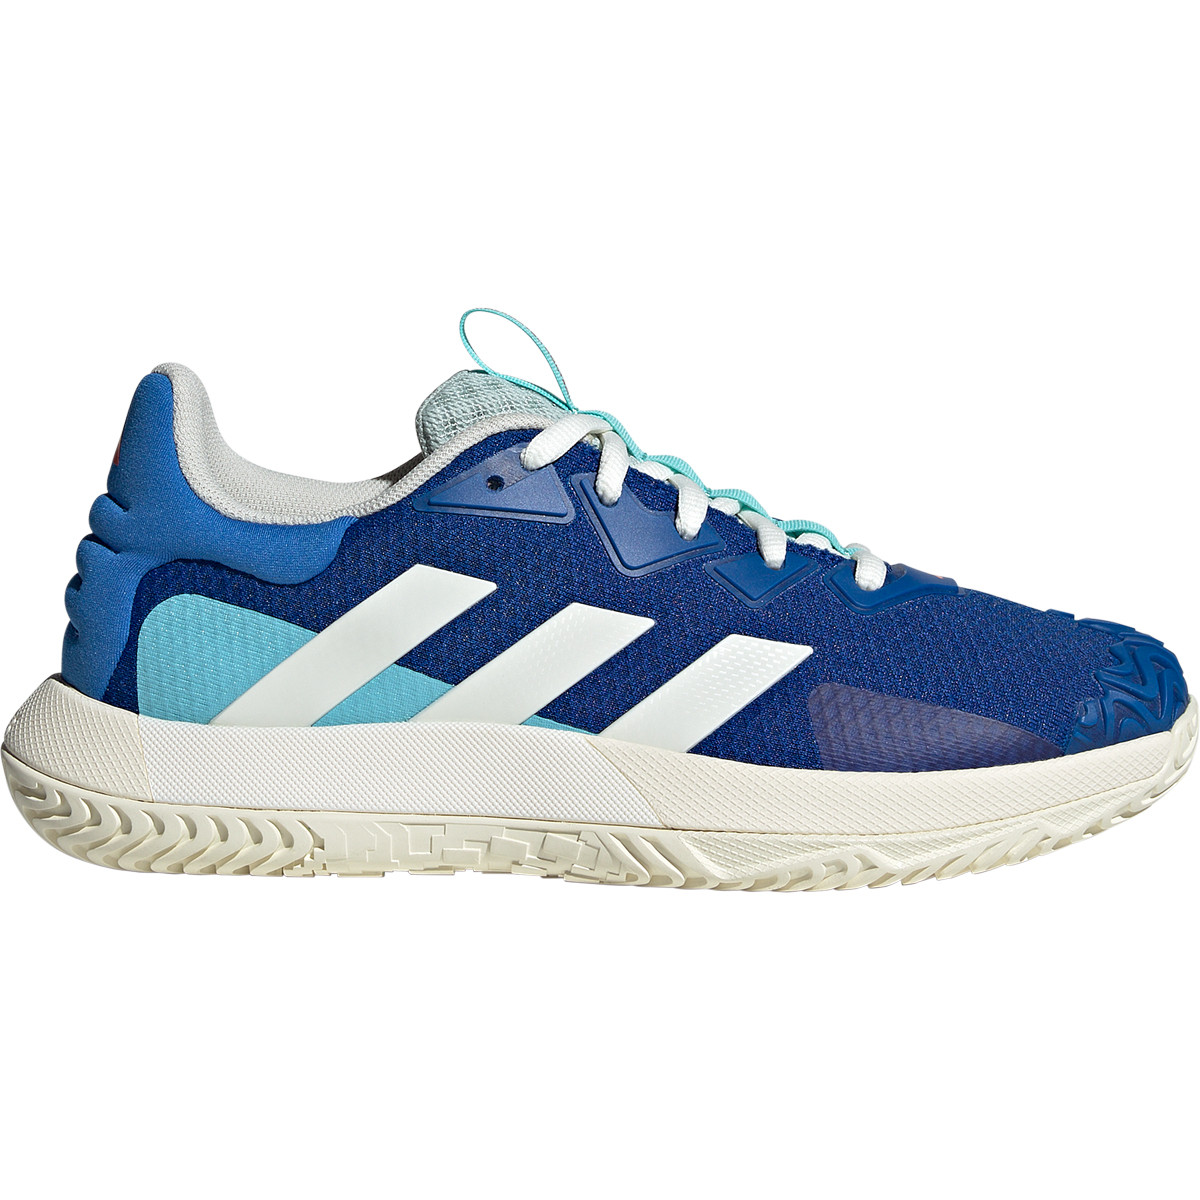 CHAUSSURES ADIDAS SOLEMATCH CONTROL TOUTES SURFACES